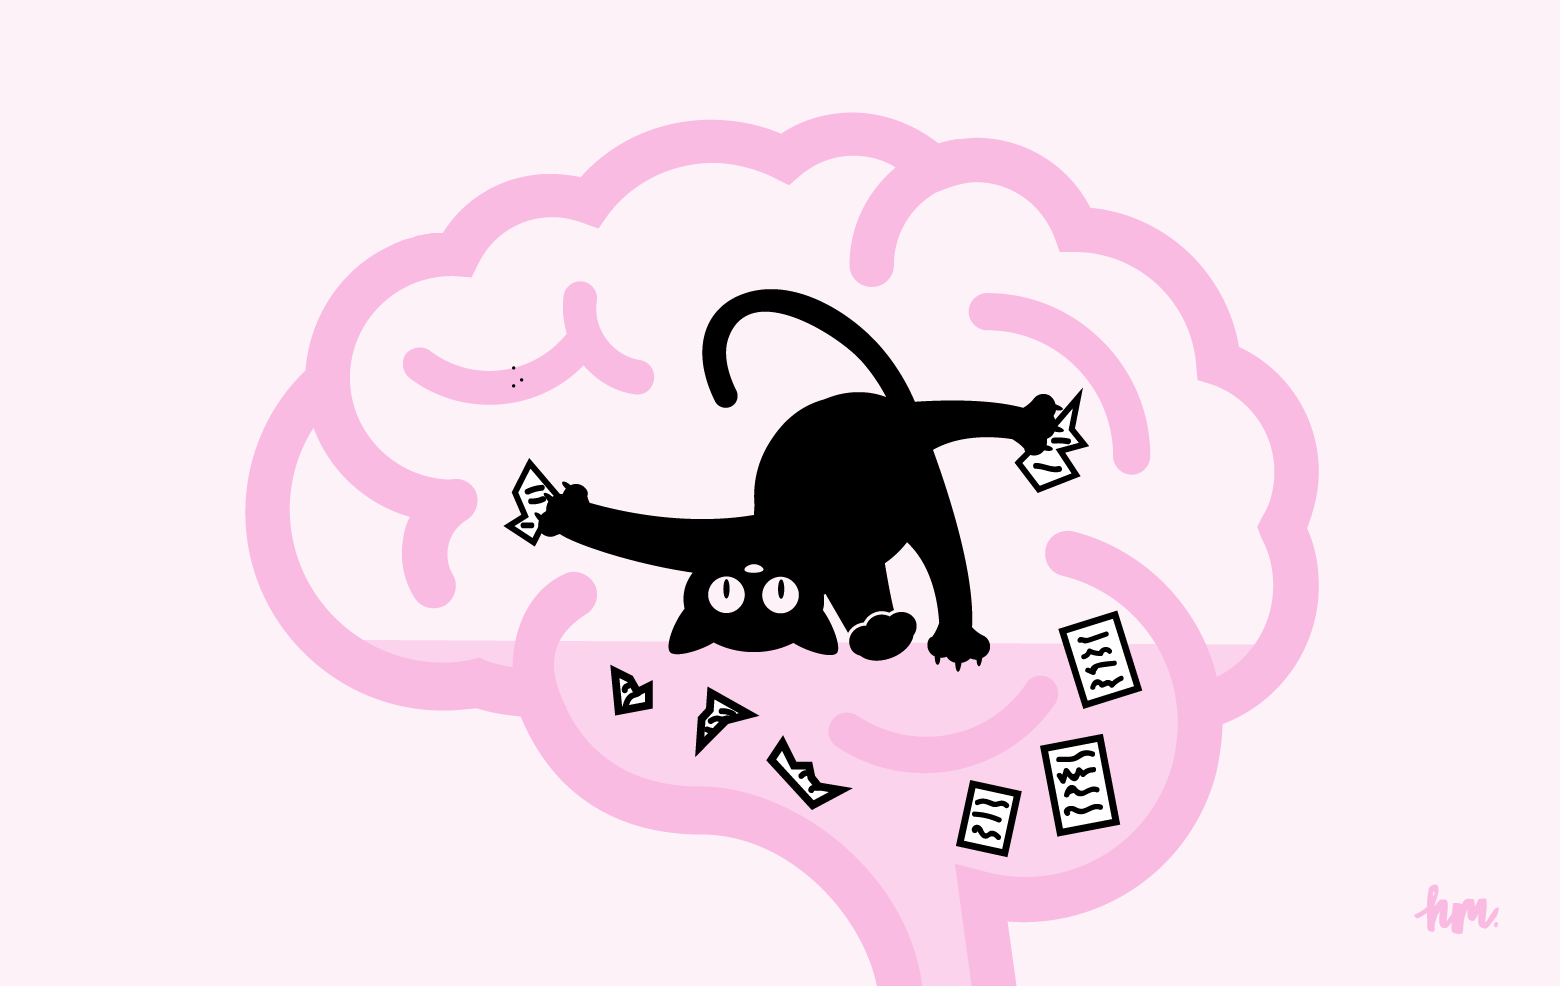 Illustration of a kitten playing with and shredding thoughts as they enter the brain.